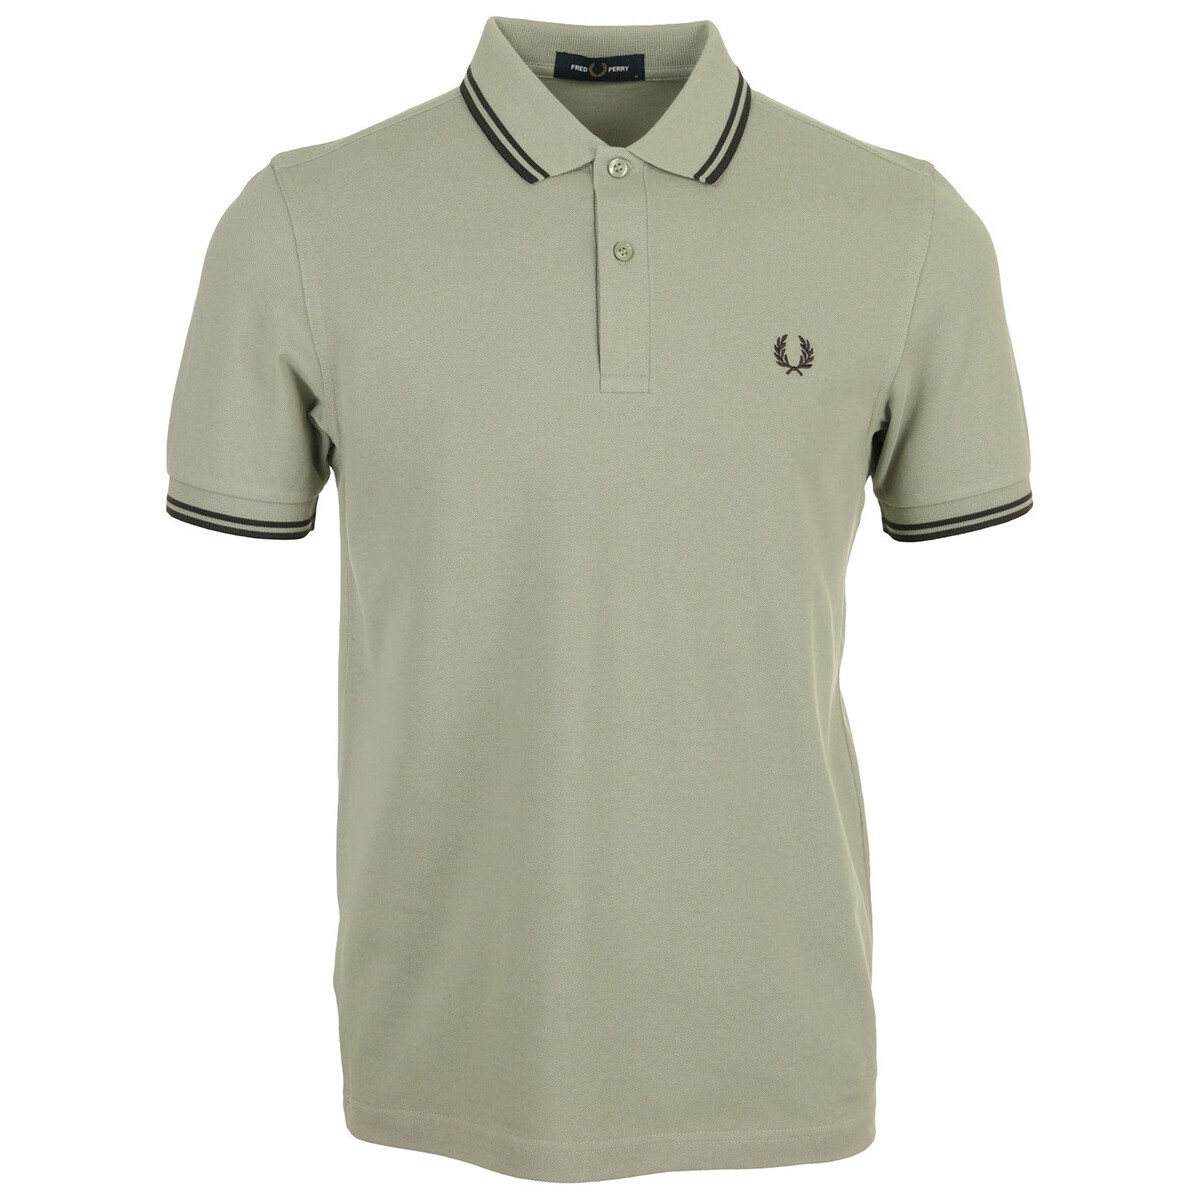 Vêtements Homme T-shirts & Polos Fred Perry Twin Tipped Gris